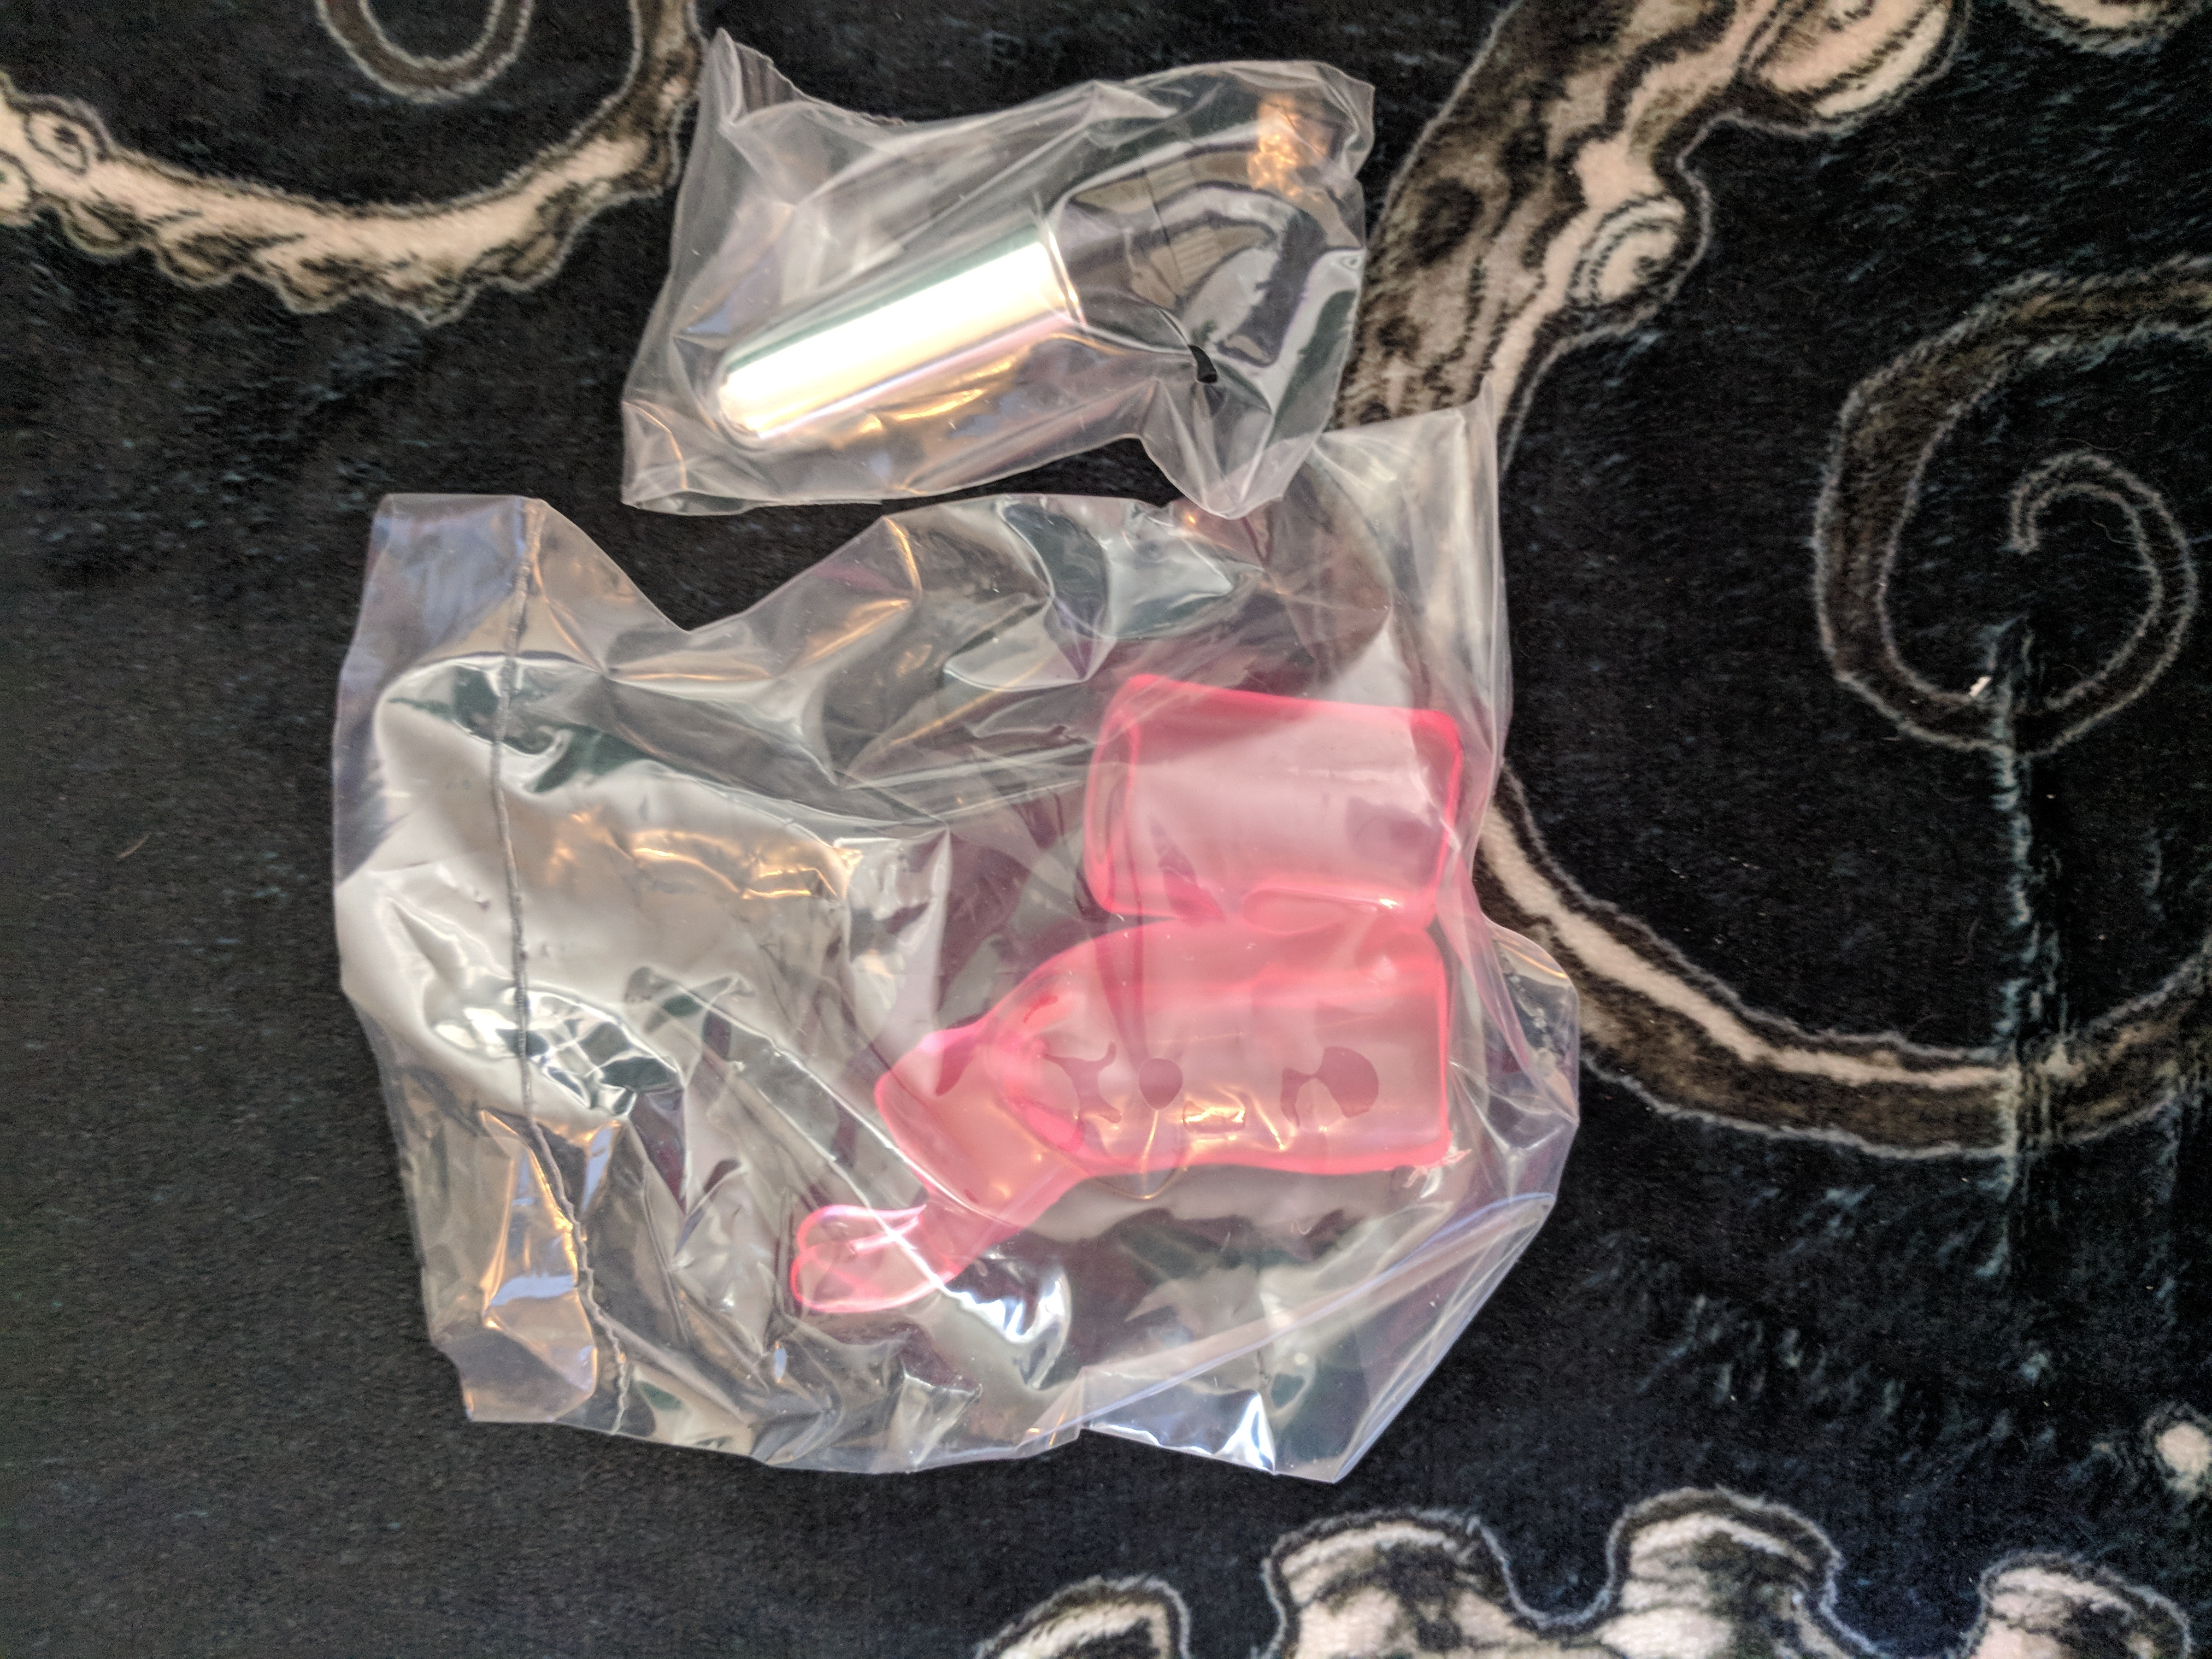 Pocket bunny vibrator box opened, with each toy part wrapped in separate plastic bags